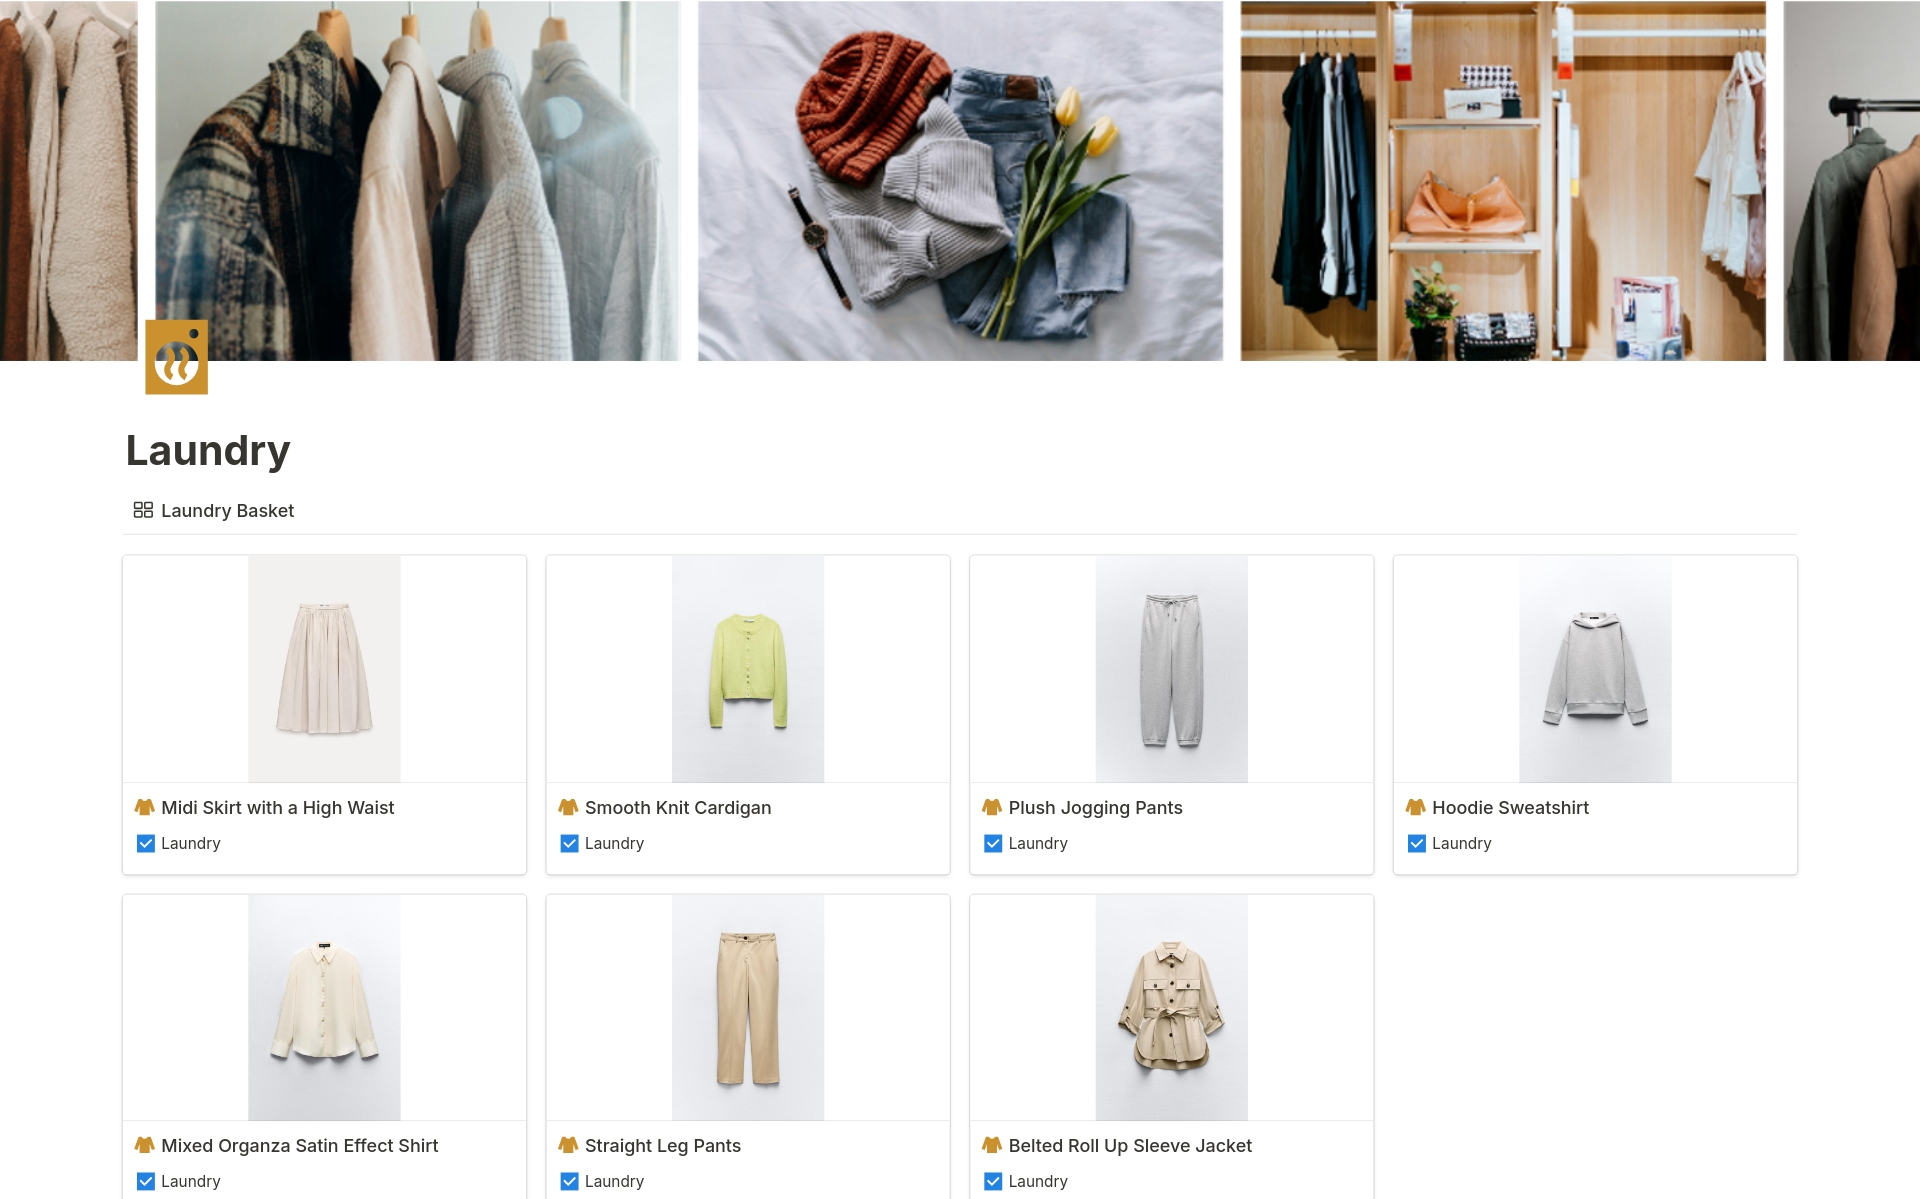 Transform your closet into a style sanctuary with our All-in-One Notion Wardrobe Manager! Effortlessly plan outfits, organize your wardrobe, and curate an aesthetic closet experience. Simplify your life, elevate your style. Your go-to solution for clothes management awaits!